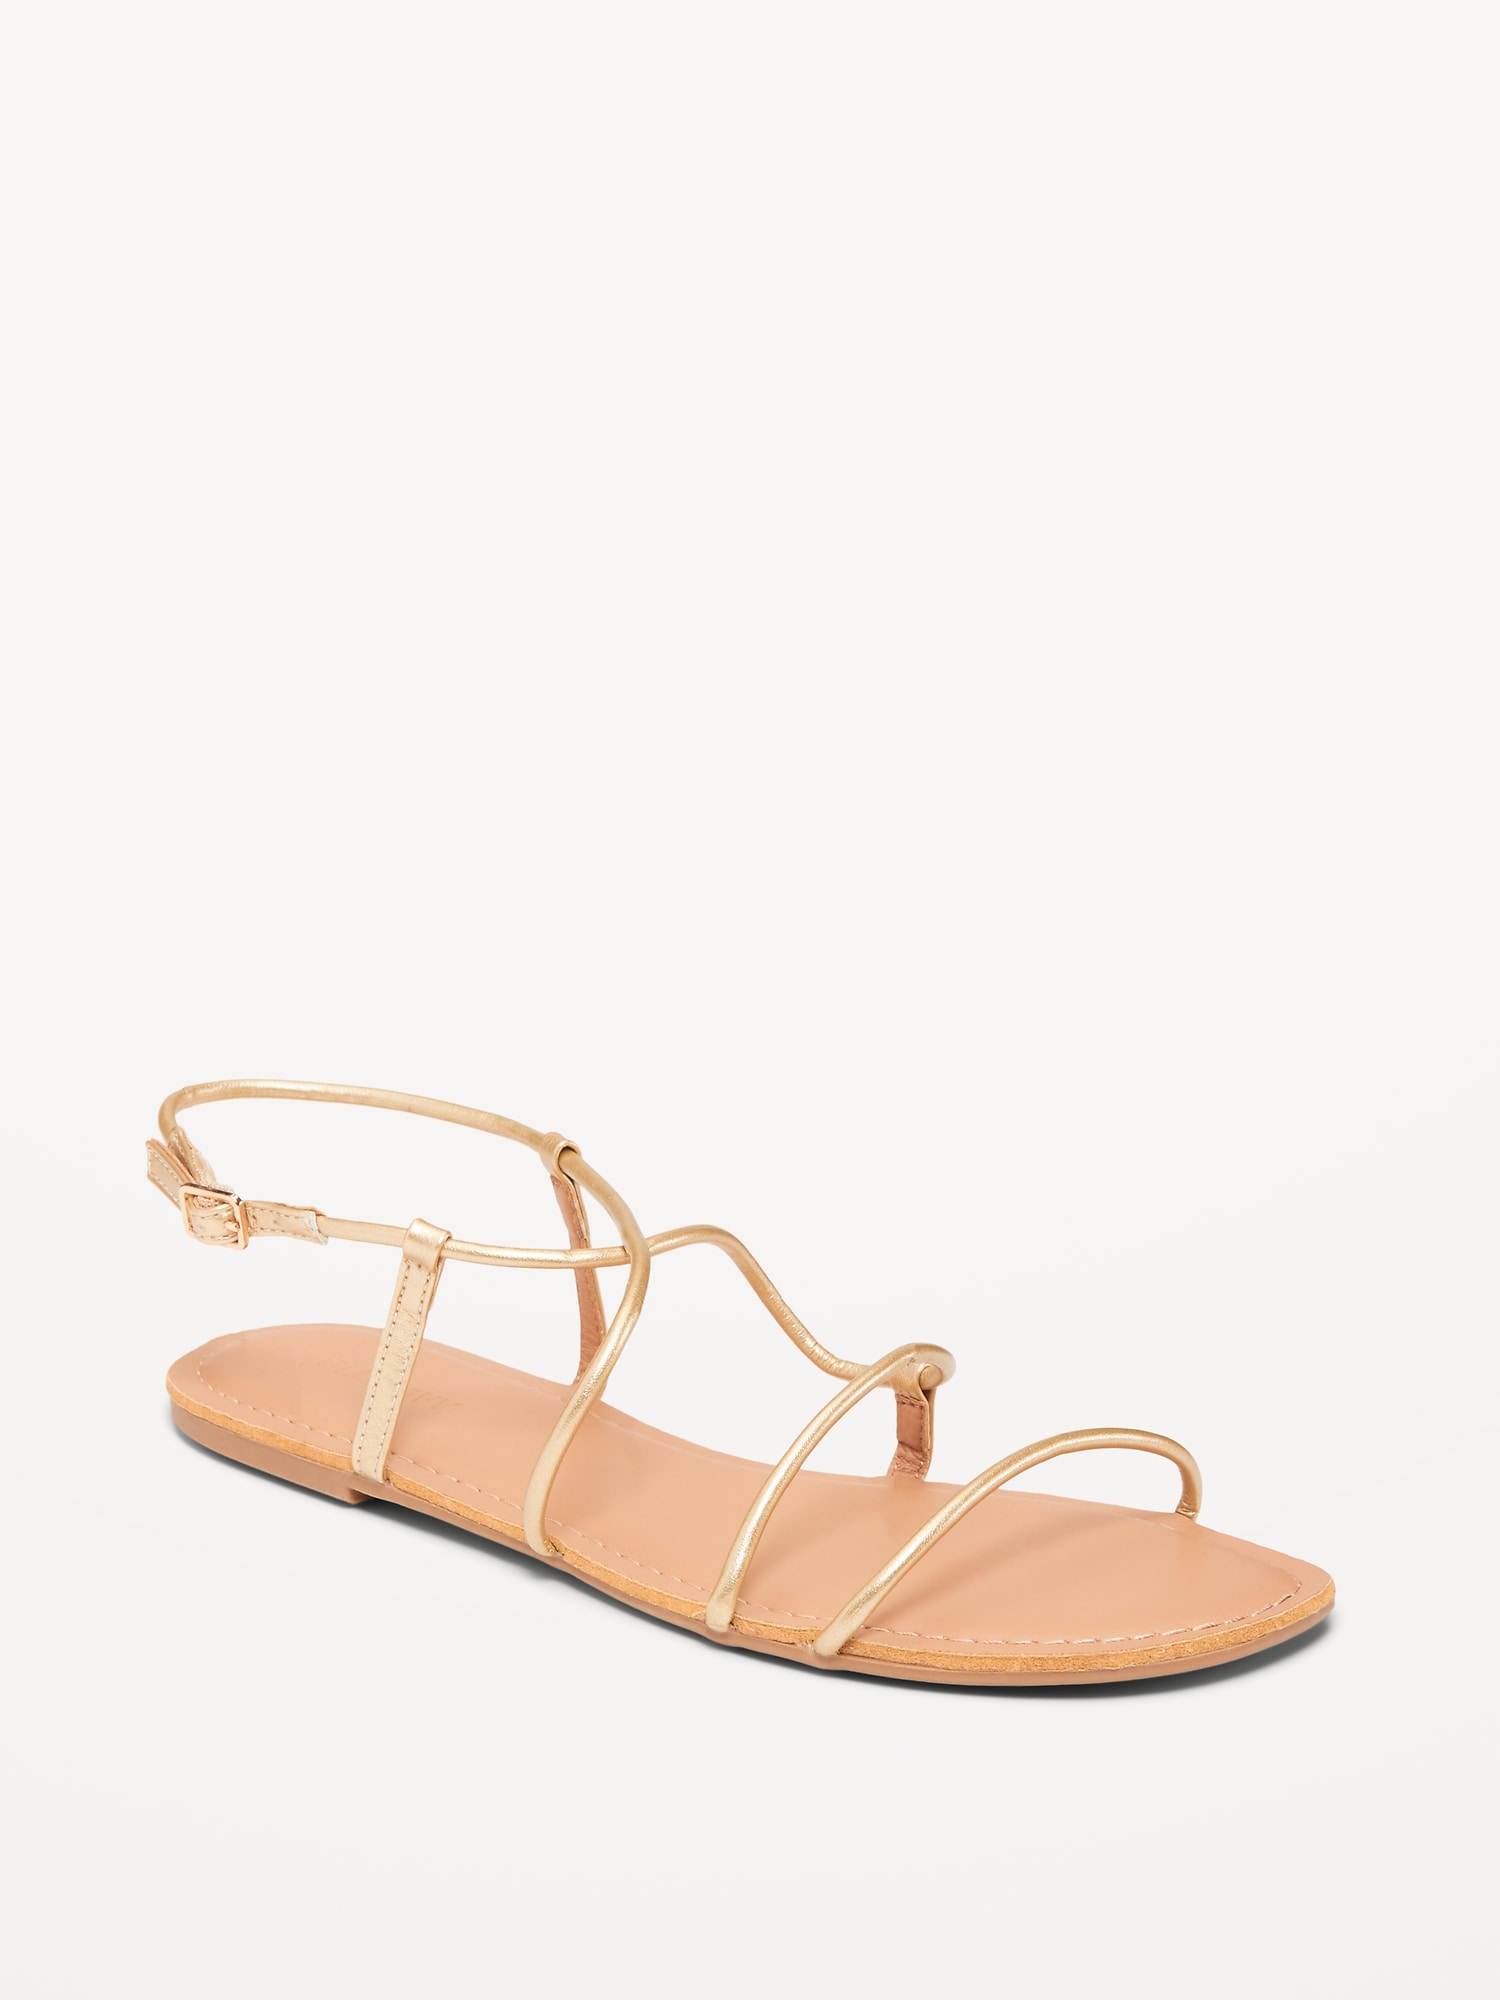 Old Navy Faux-Leather Asymmetric Strappy Sandals for Women gold. 1